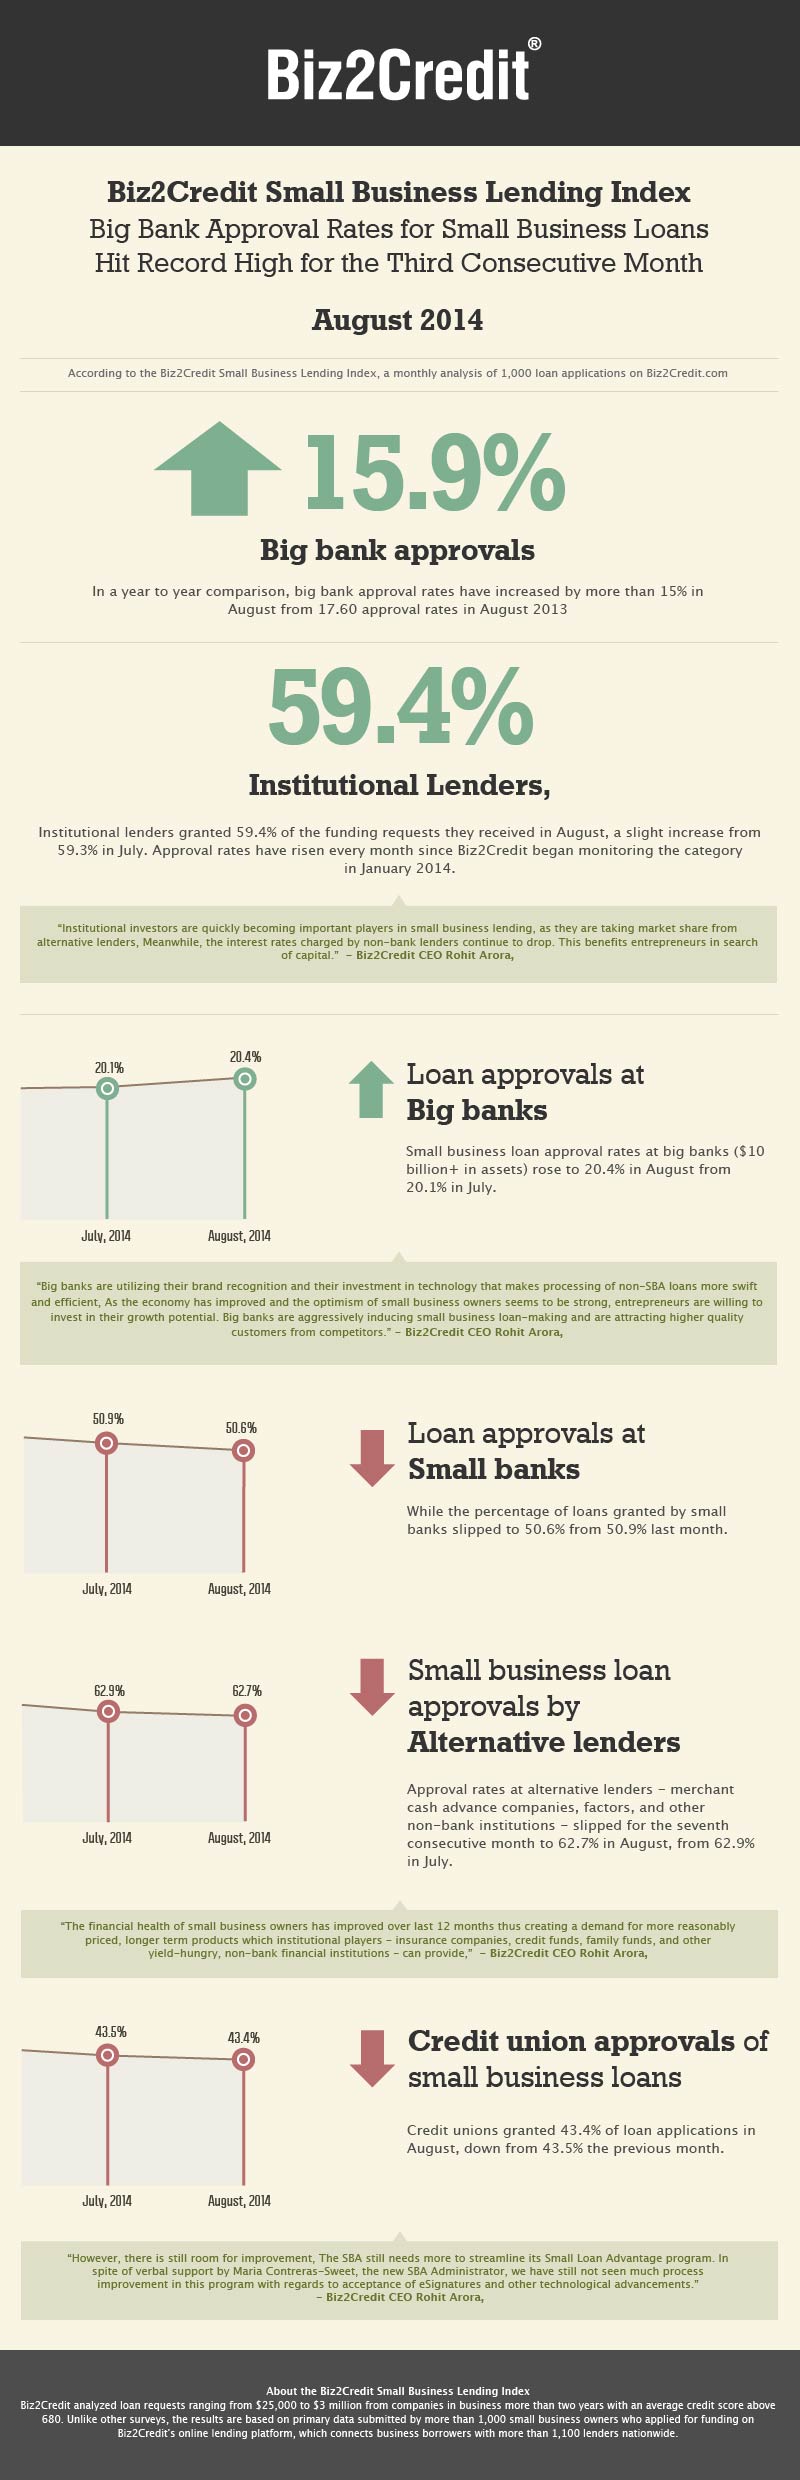 August 2014 Small Business Lending Index Infographic Visually 7476